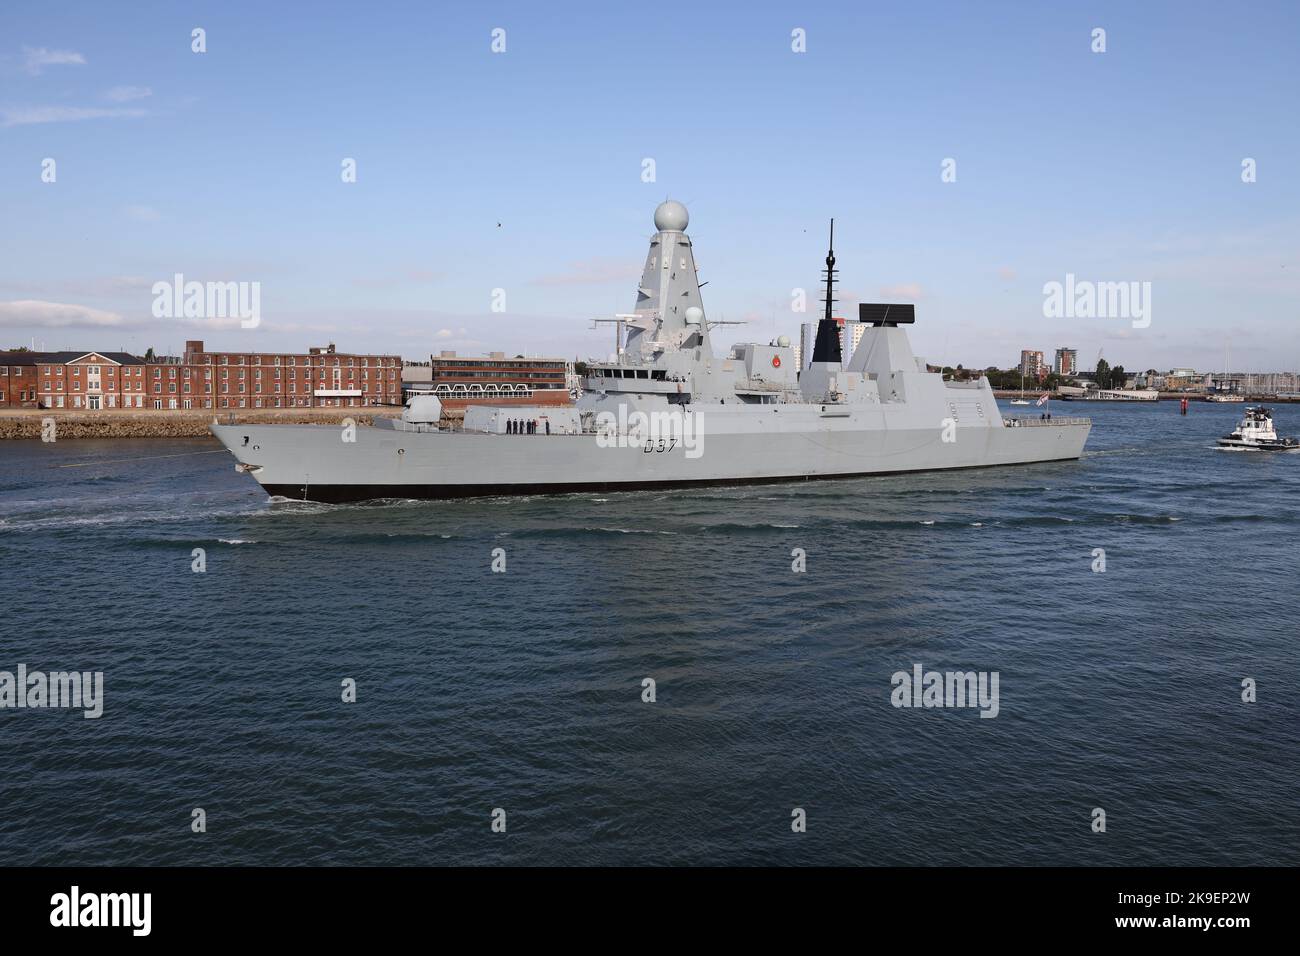 The Royal Navy Type 45 destroyer HMS DUNCAN leaving the Naval Base Stock Photo